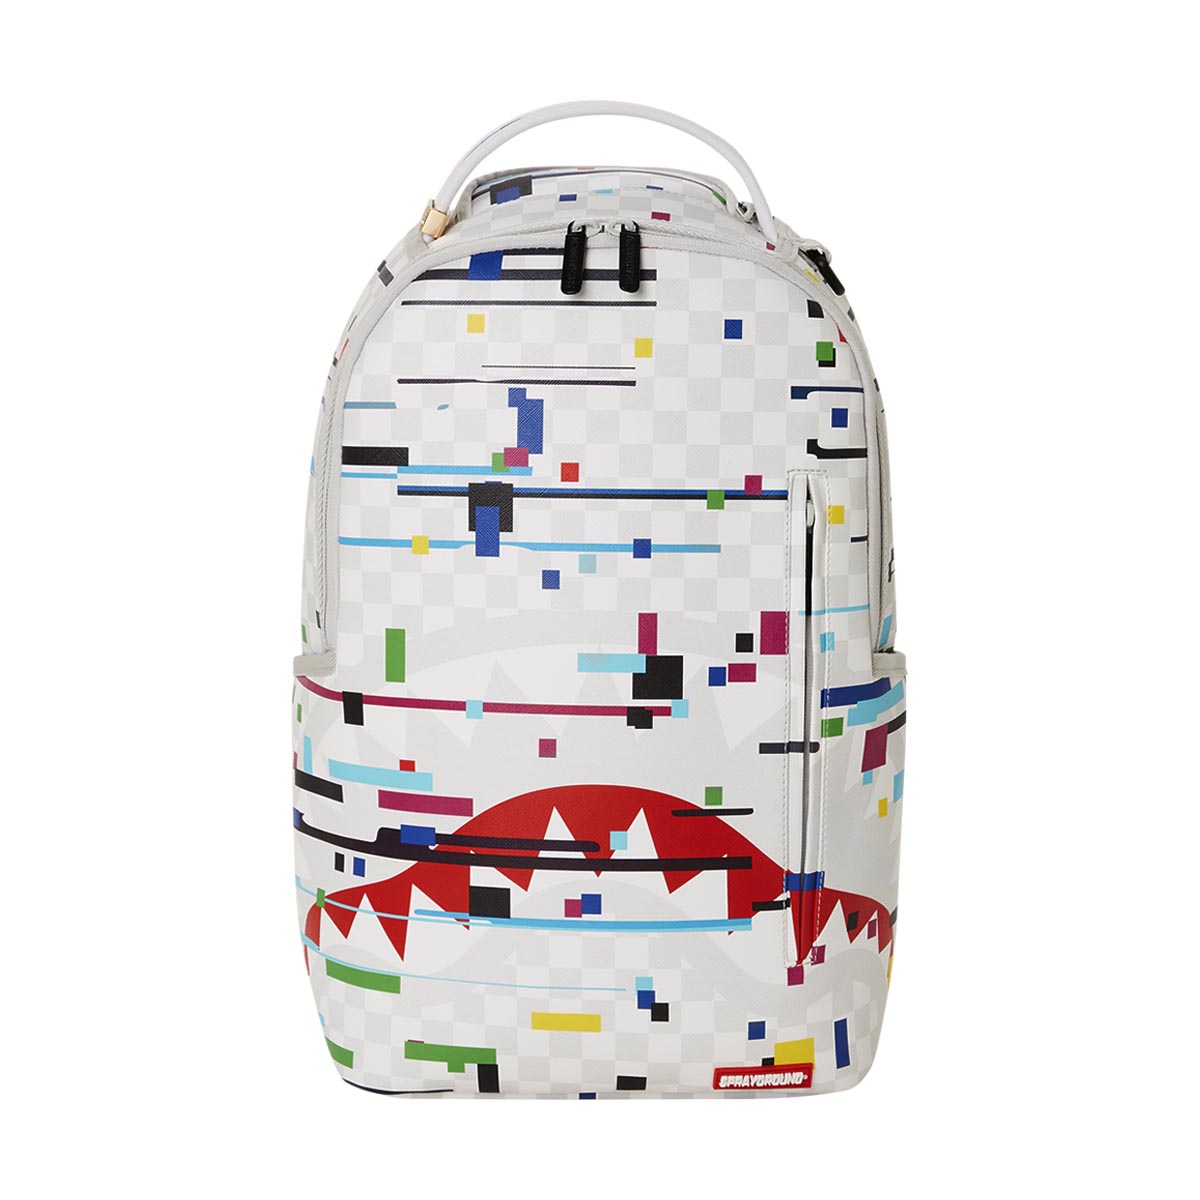 Sharnks in Paris Glitch Rider Backpack